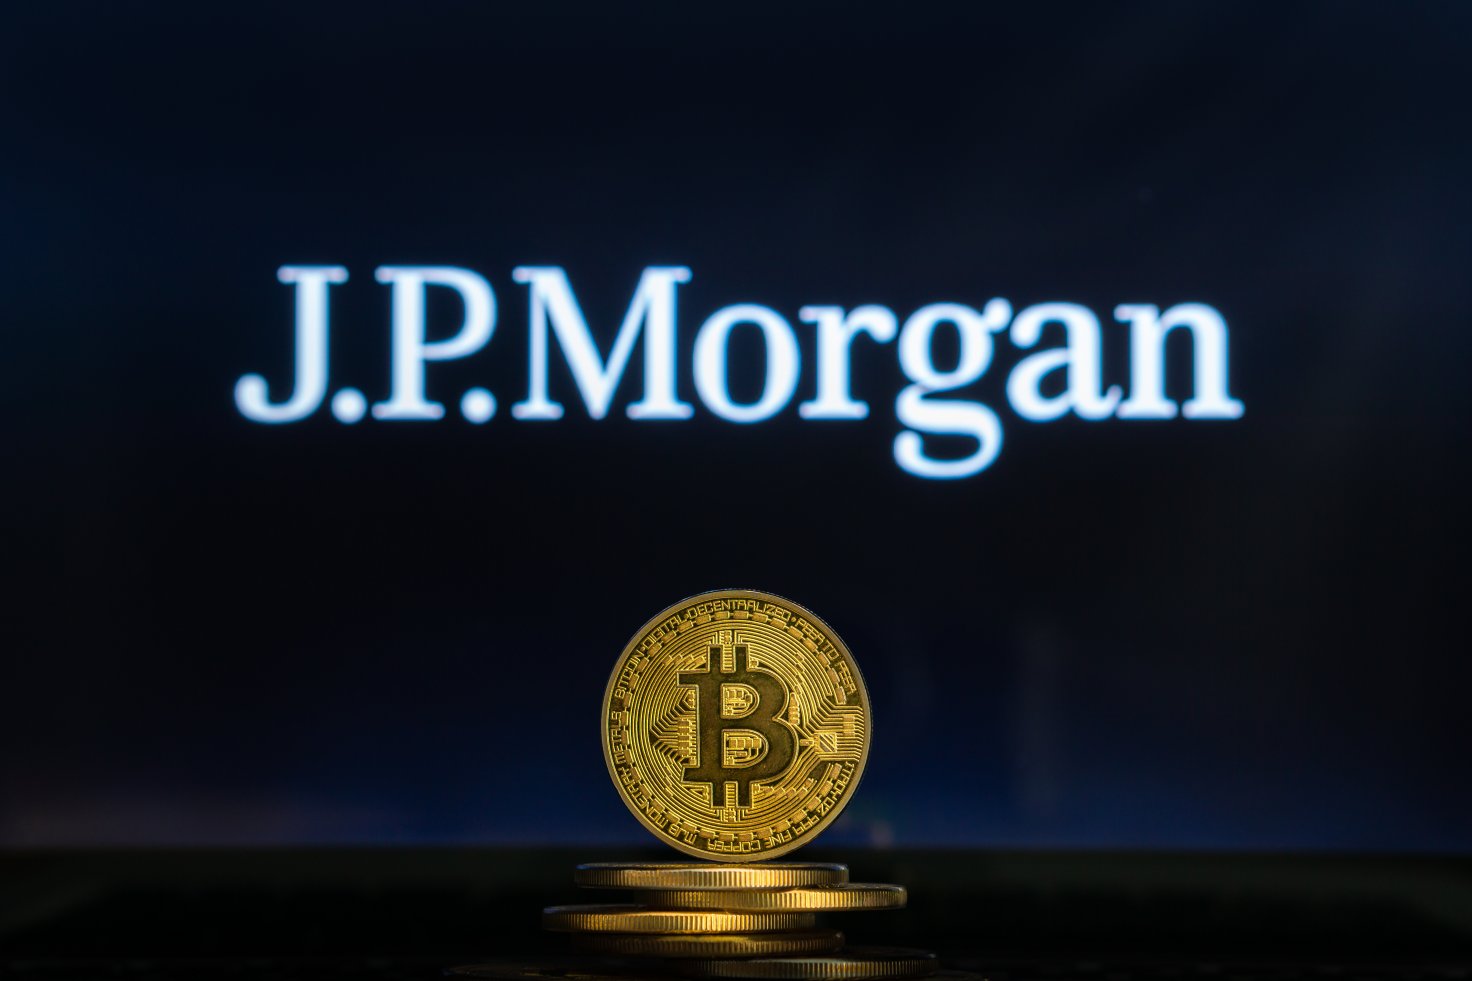 JP offers access to crypto funds to all clients